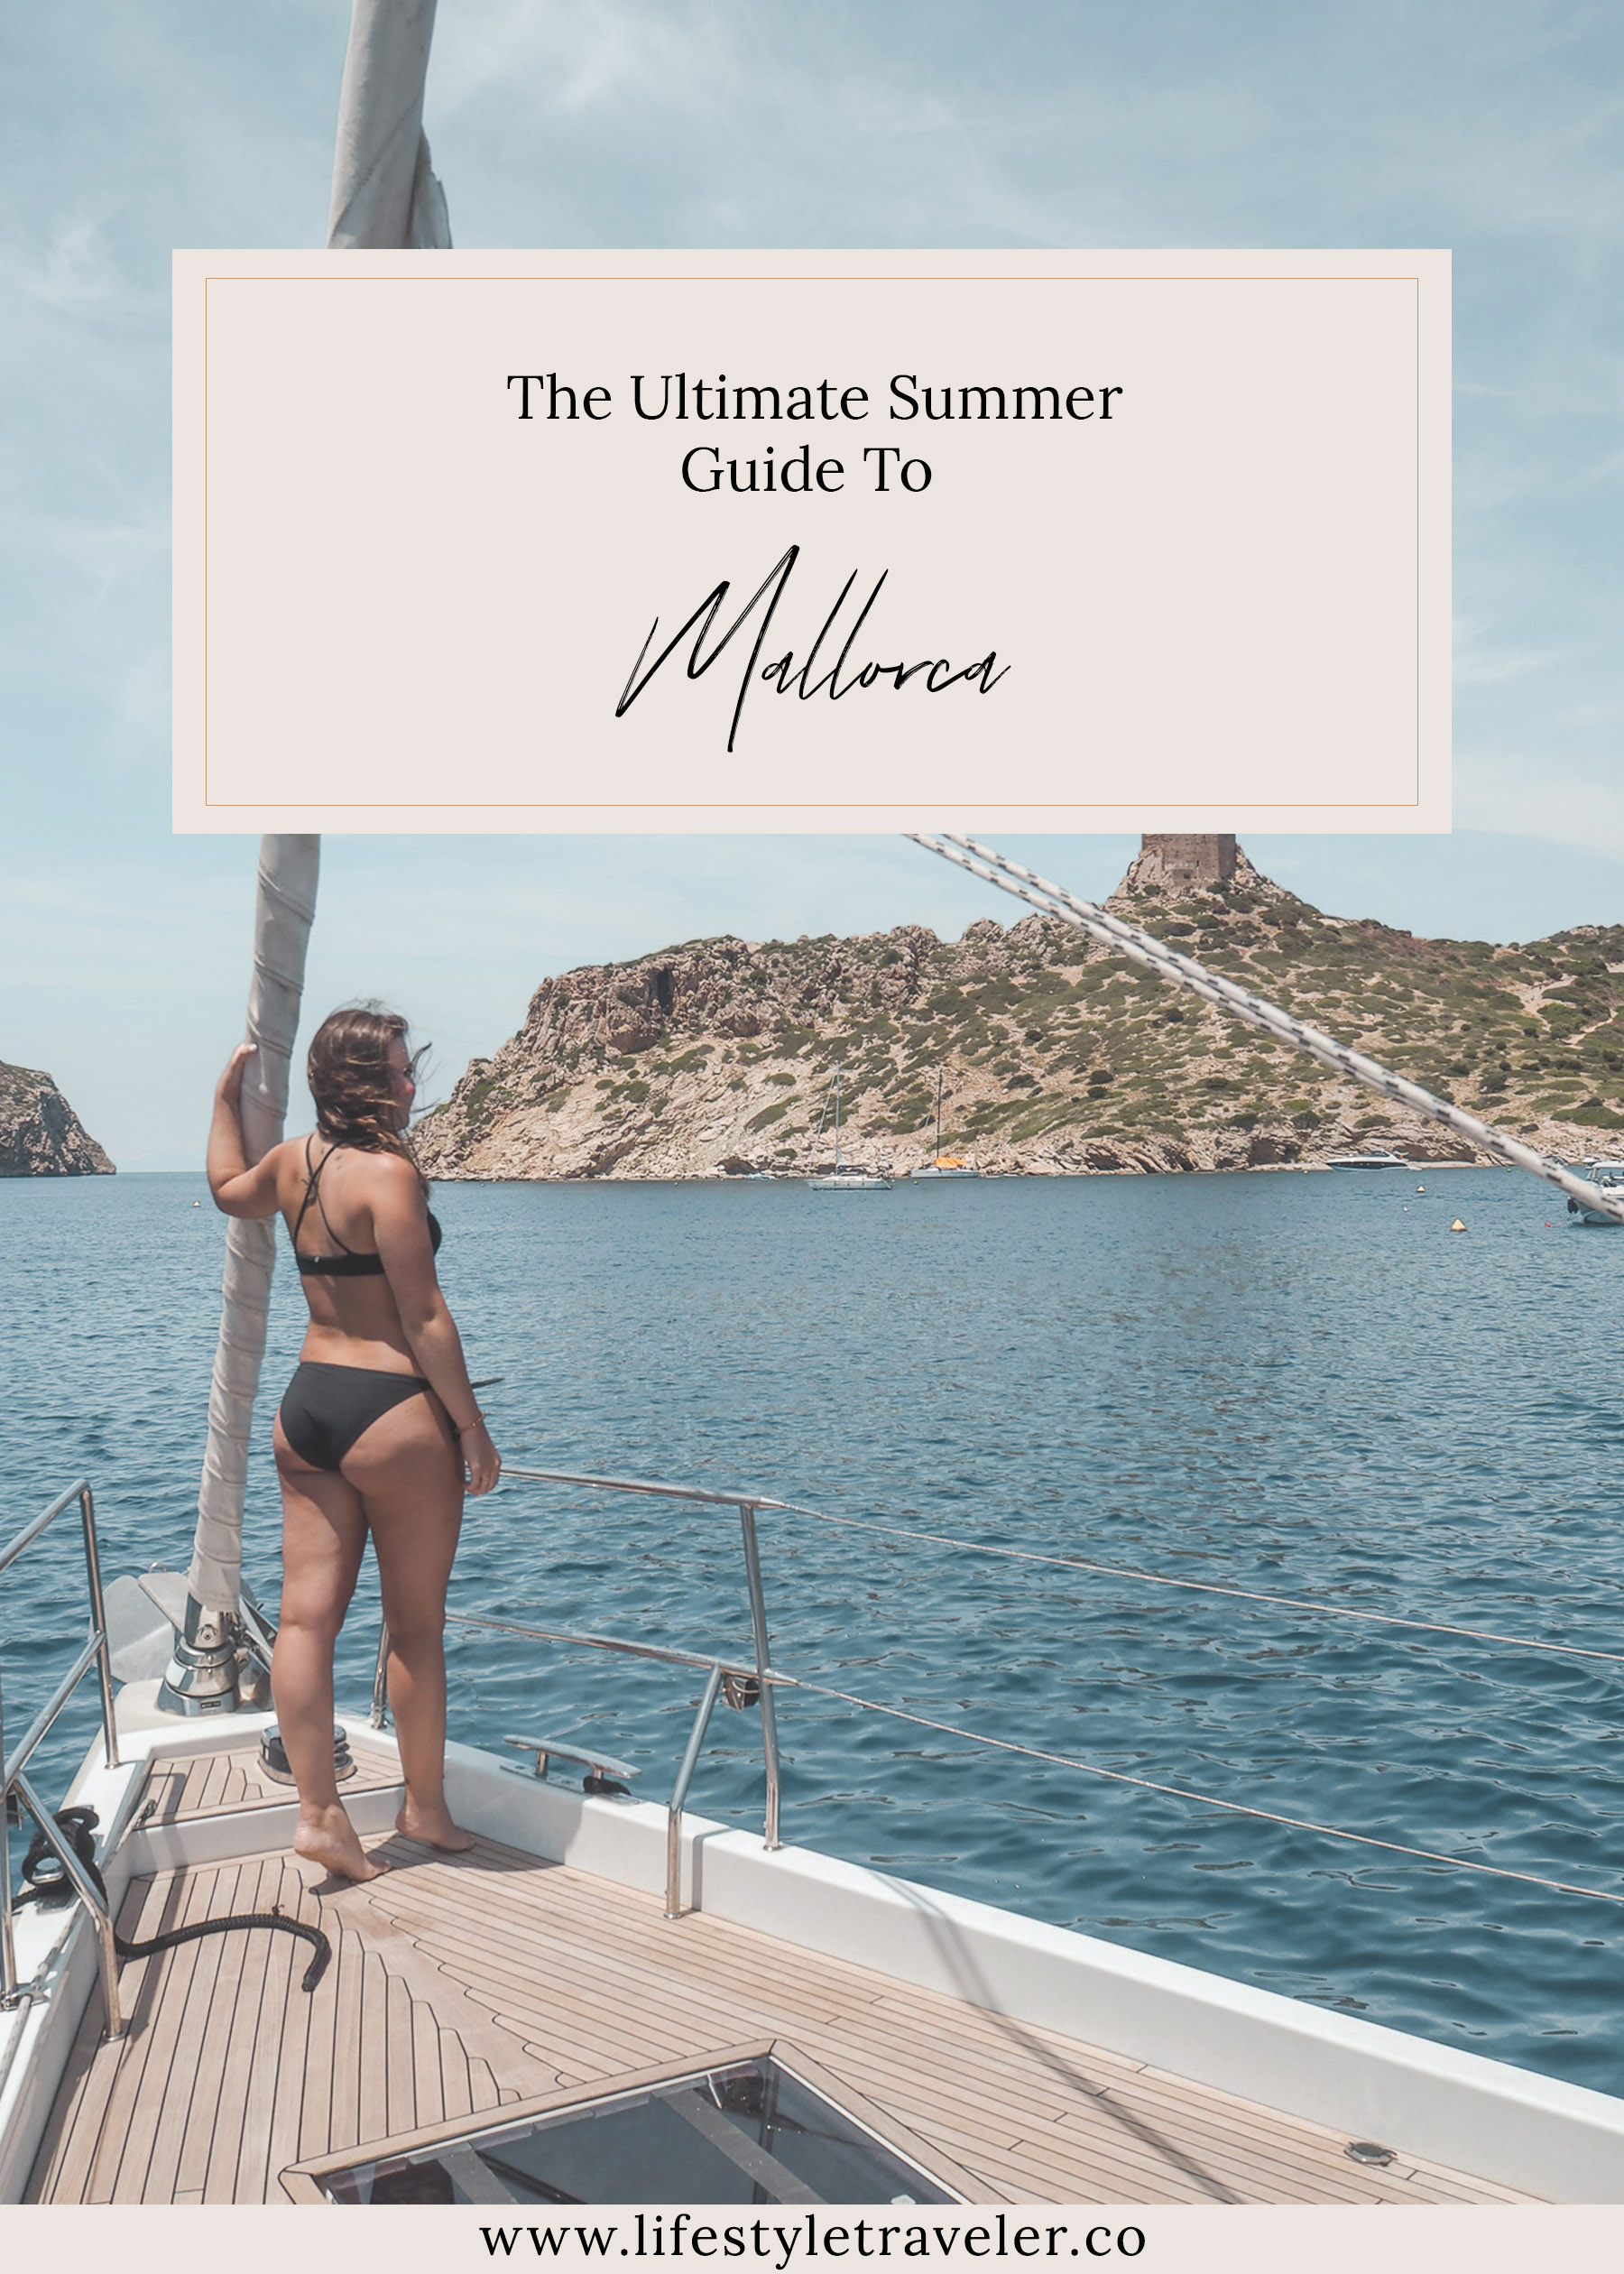 Summer In Mallorca: The Ultimate Leisure Guide | lifestyletraveler.co | IG: @lifestyletraveler.co